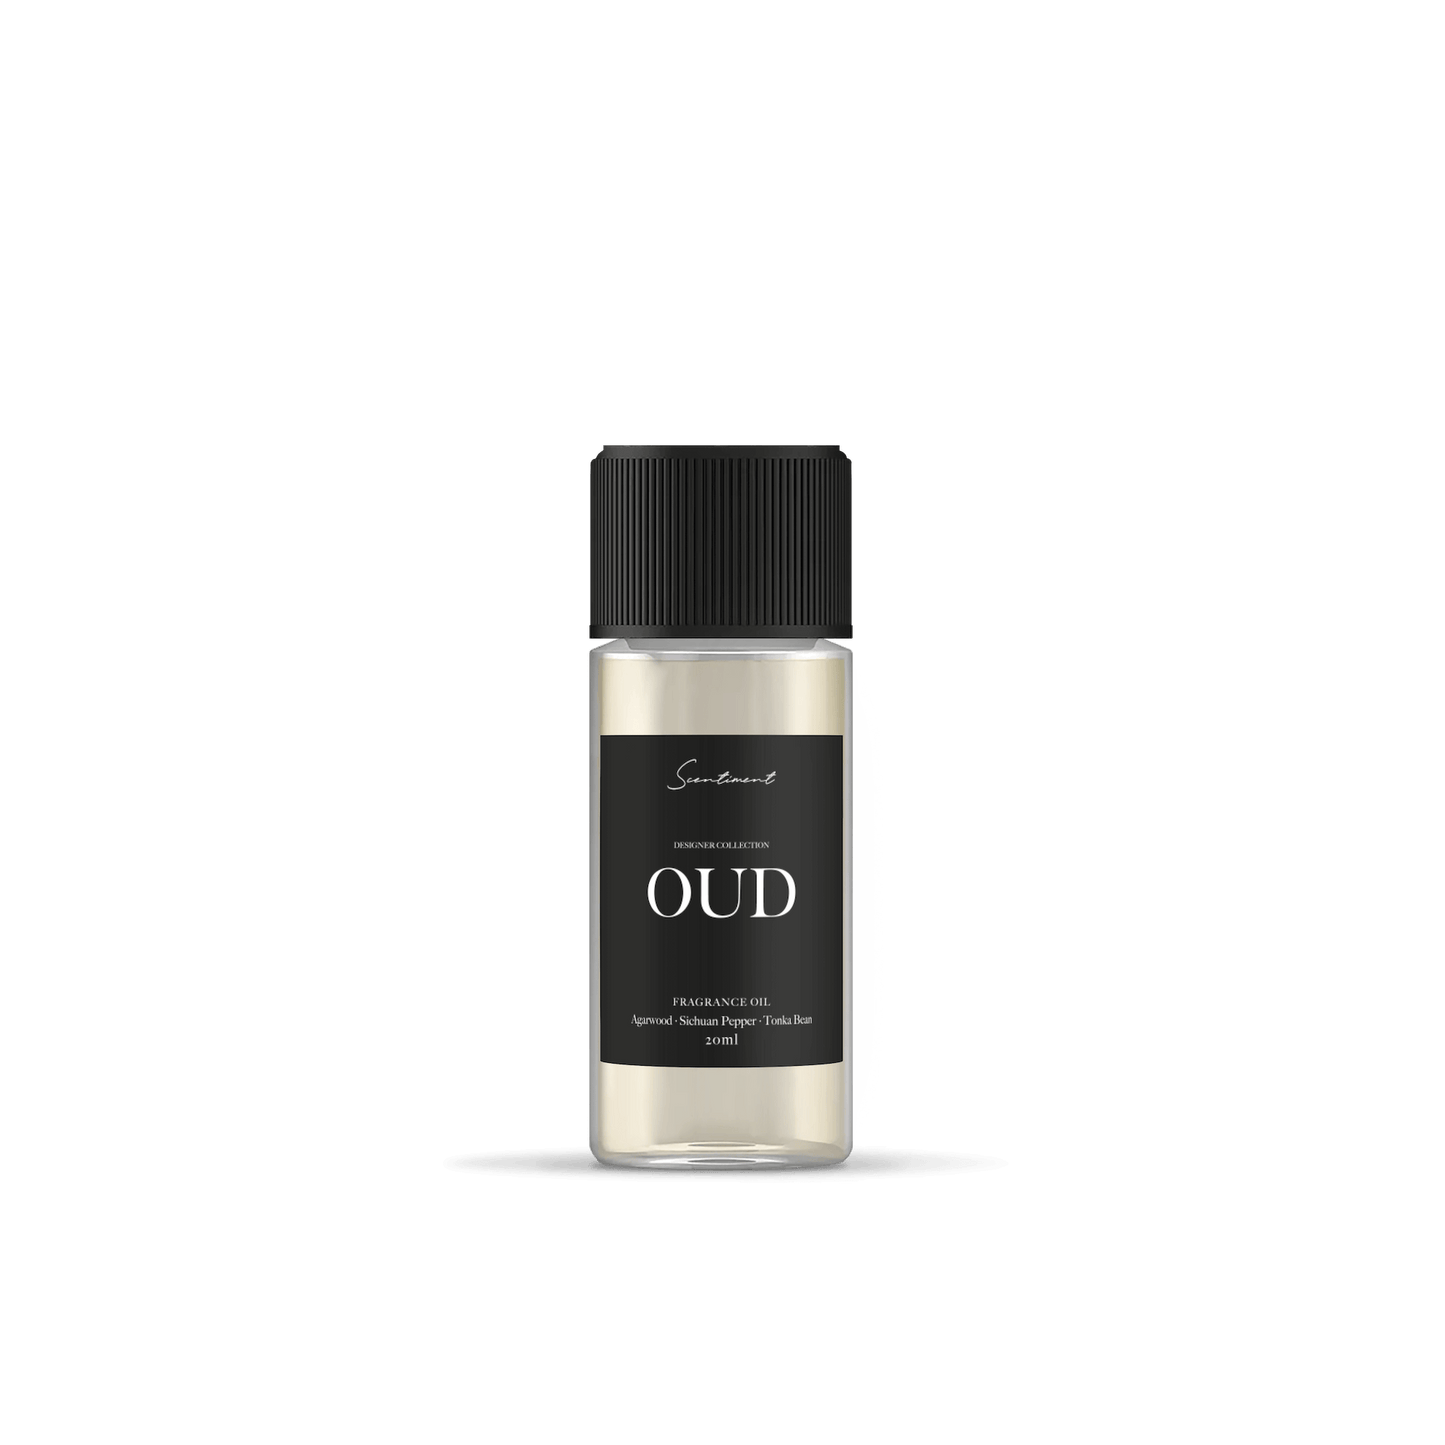 Oud 20ml Fragrance Oil, Inspired by Tom Ford® Oud Wood